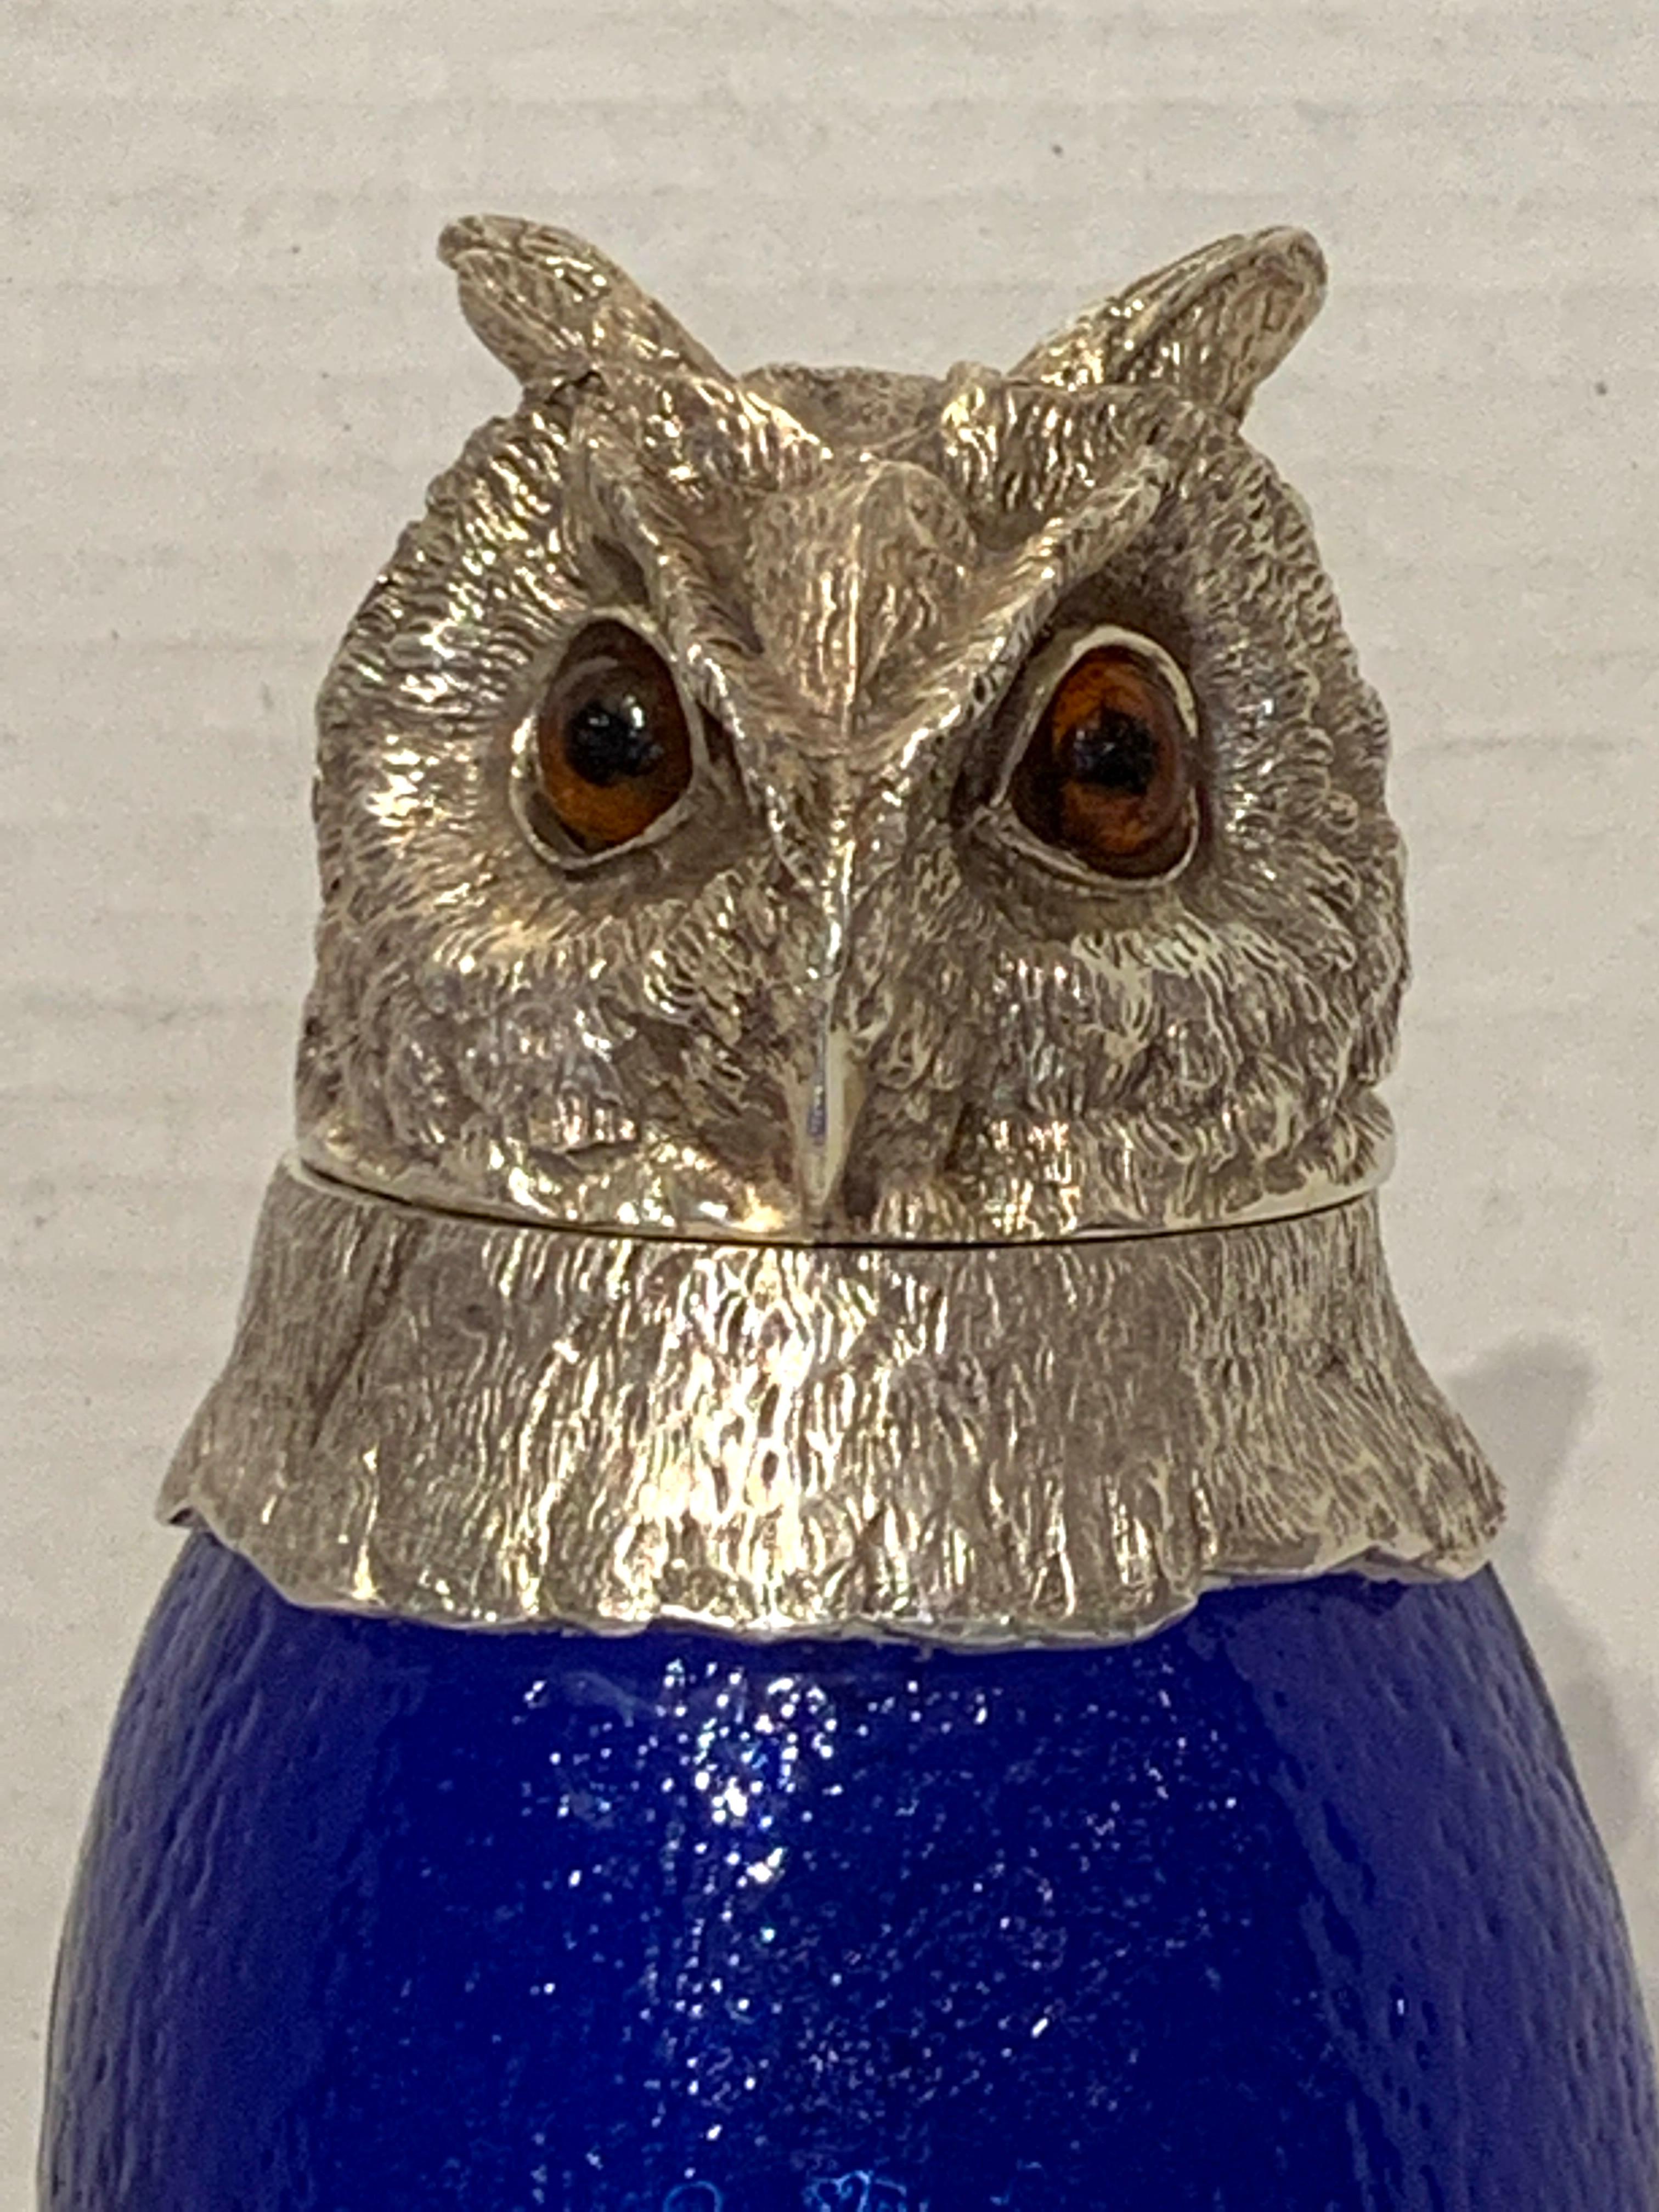 20th Century English Silverplated Owl Motif Decanter